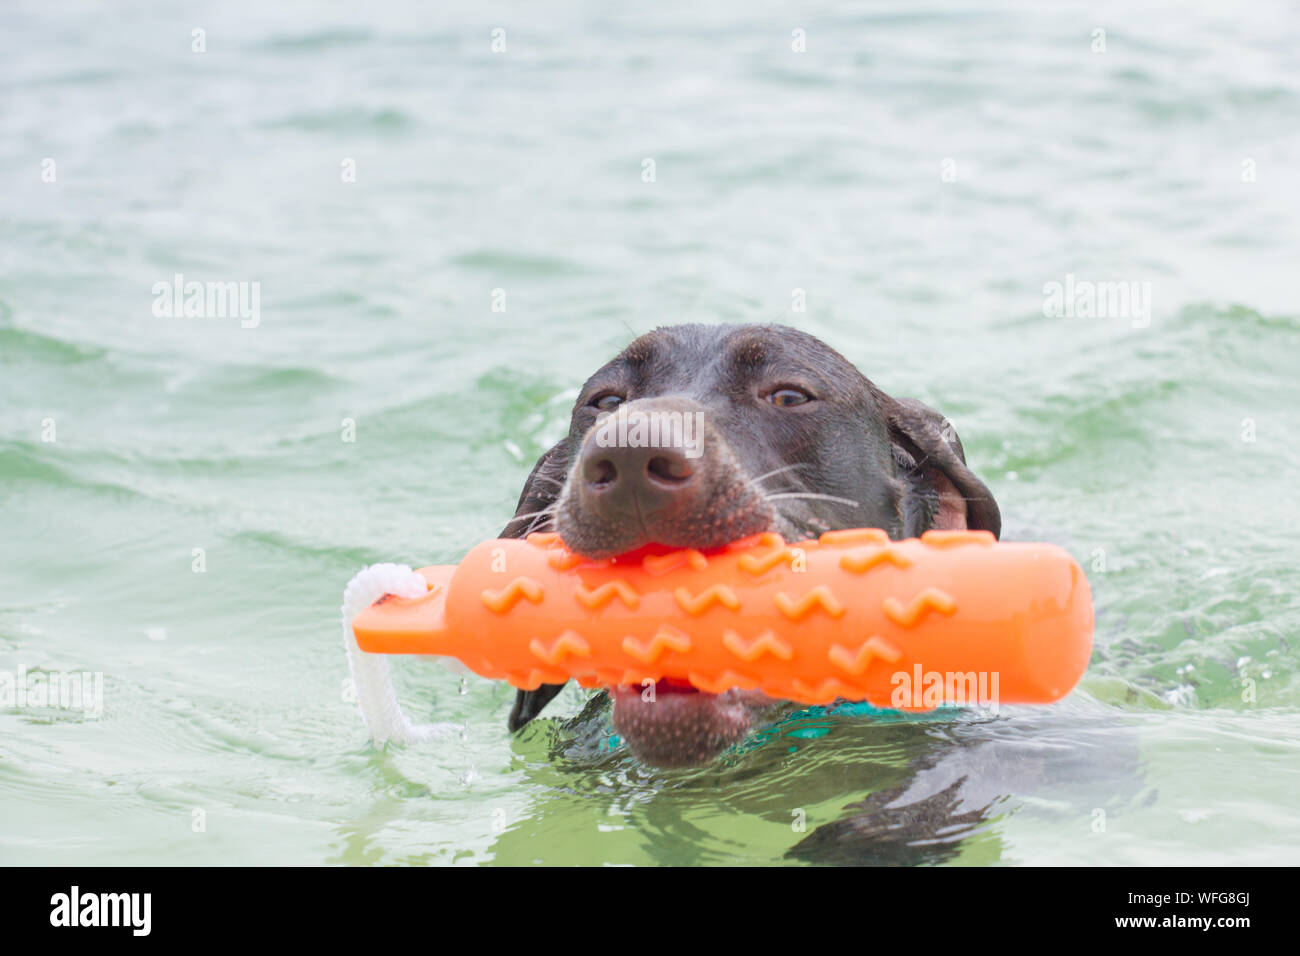 German shorthaired pointer fetching a toy in the ocean, United States Stock Photo